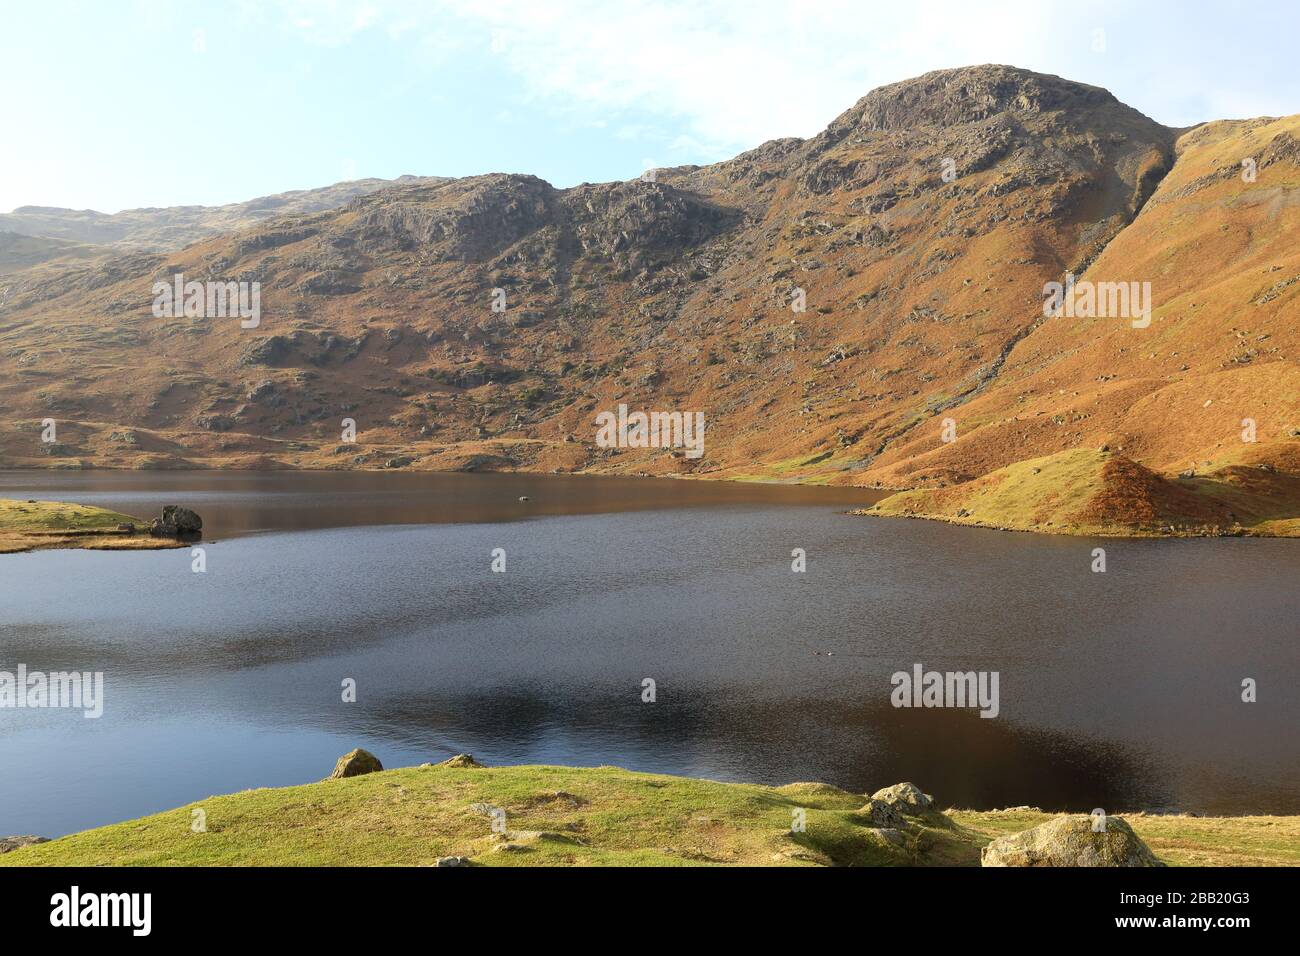 Beautiful and peaceful landscape of Easedale Tarn in the Cumbrian Fells of England's Lake District National Park. Stock Photo